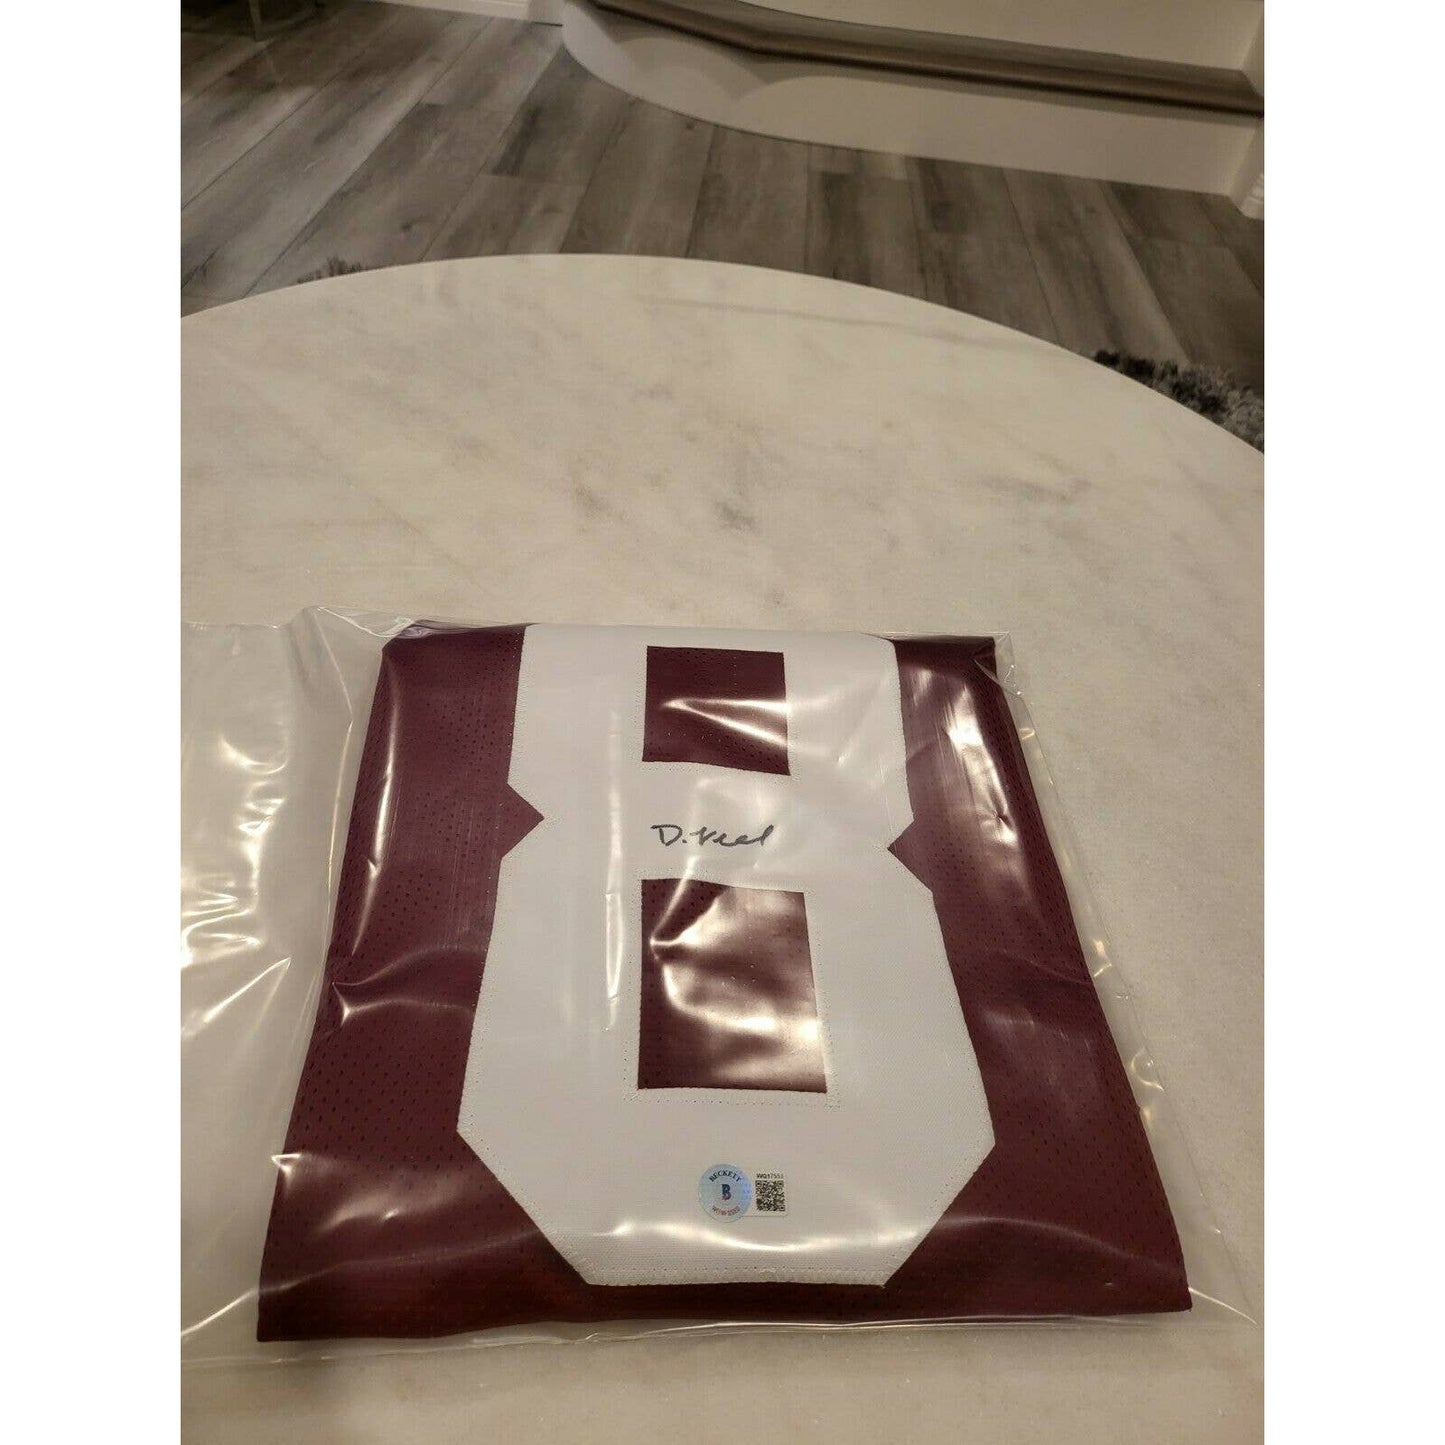 Demarvin Leal Autographed/Signed Jersey Beckett Sticker Texas A&M Aggies - TreasuresEvolved